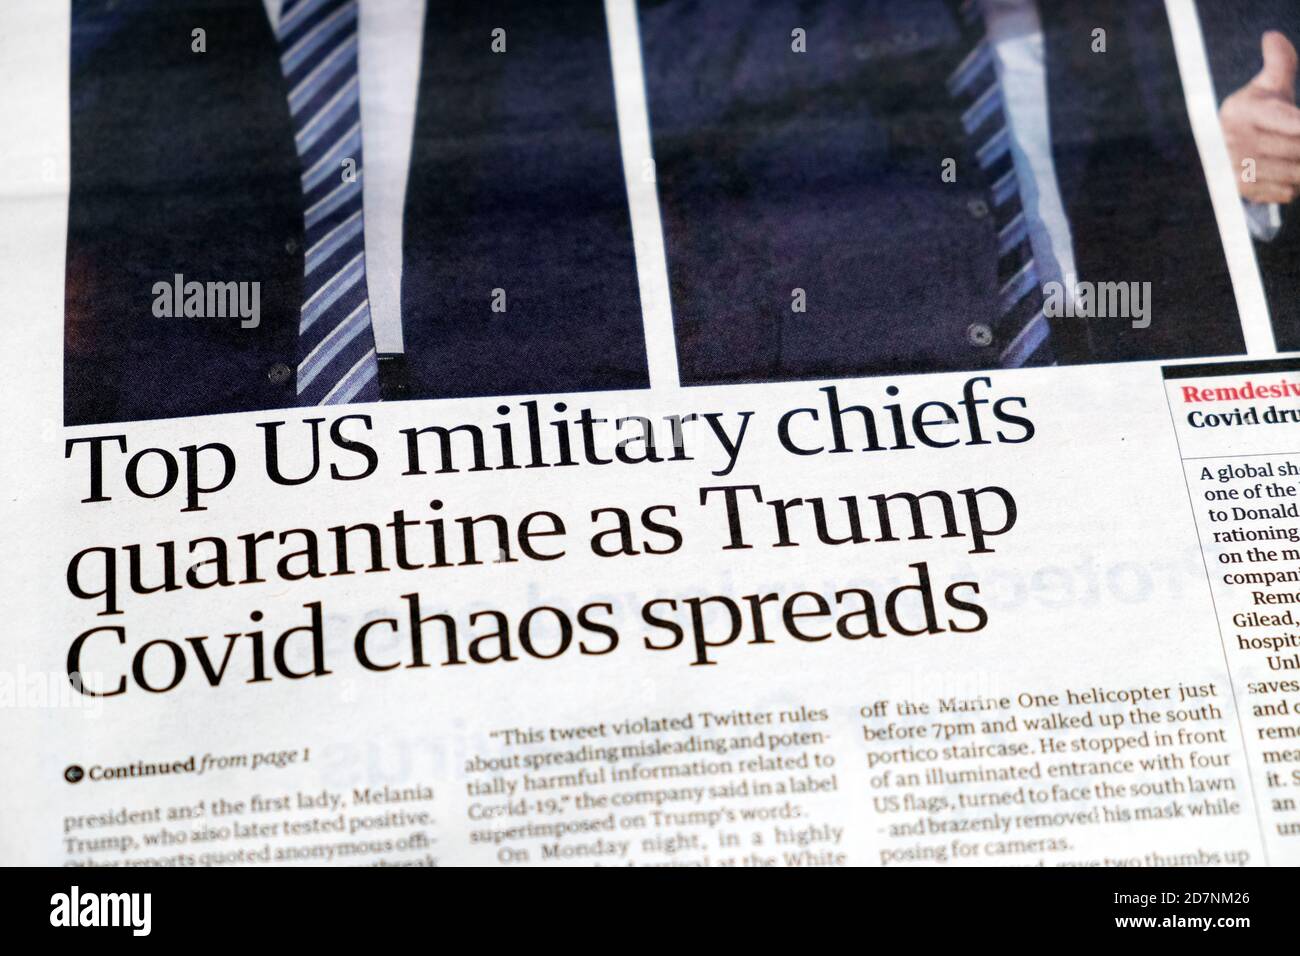 'Top US military chiefs quarantine as Trump Covid chaos spreads' newspaper headline article in The Guardian October 2020 London England UK Stock Photo